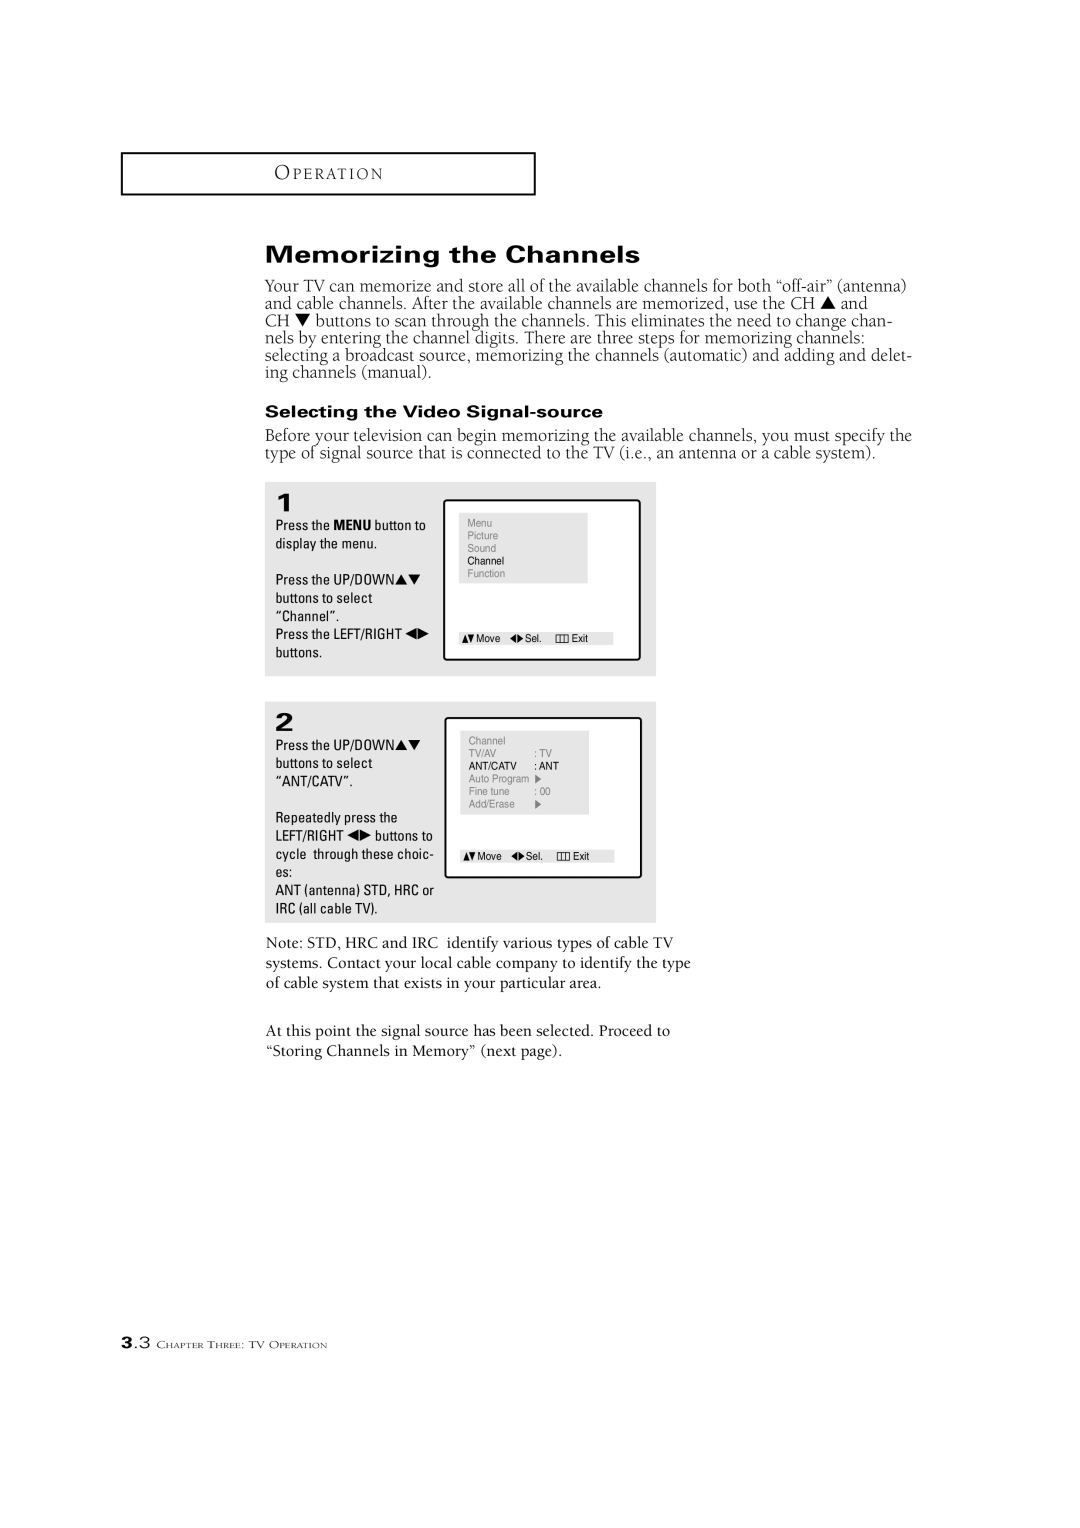 Samsung CSN2077DV manual Memorizing the Channels, Selecting the Video Signal-source 